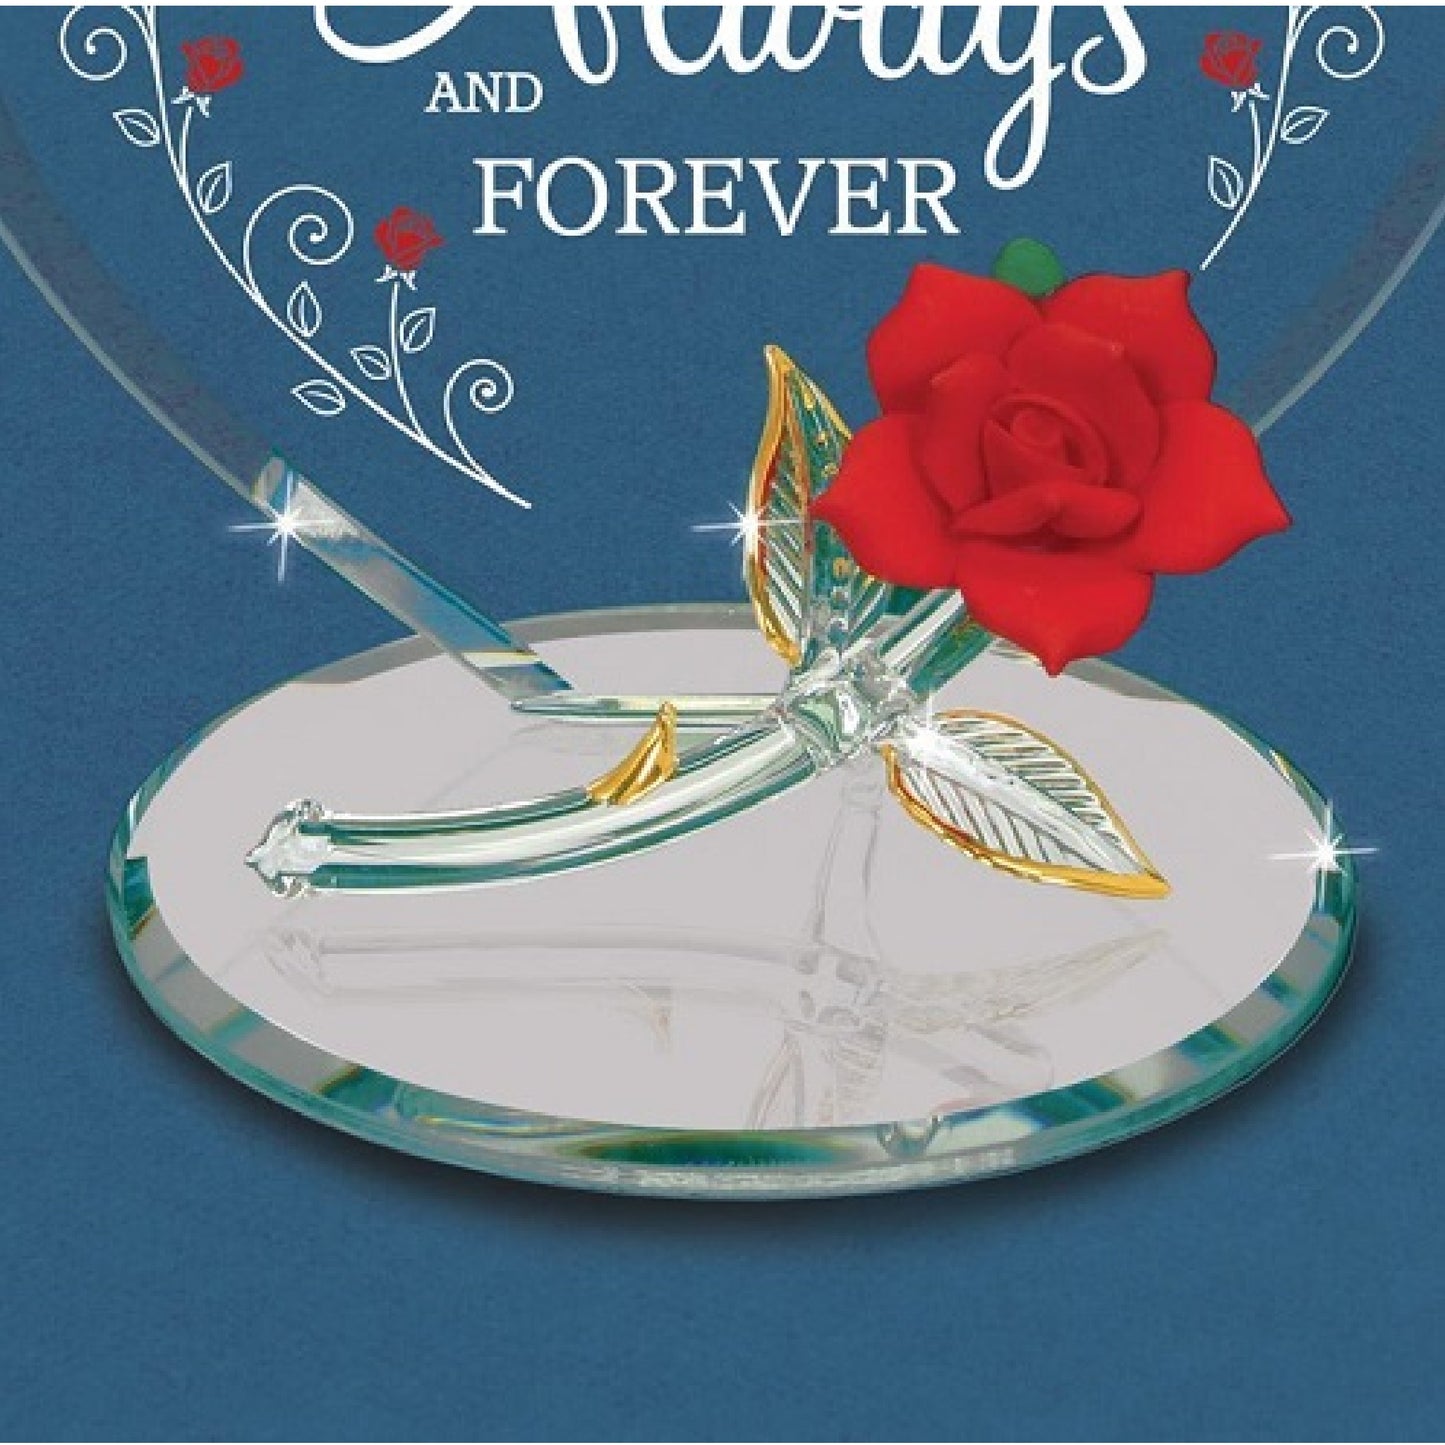 Glass Baron Rose "Always And Forever" Plaque